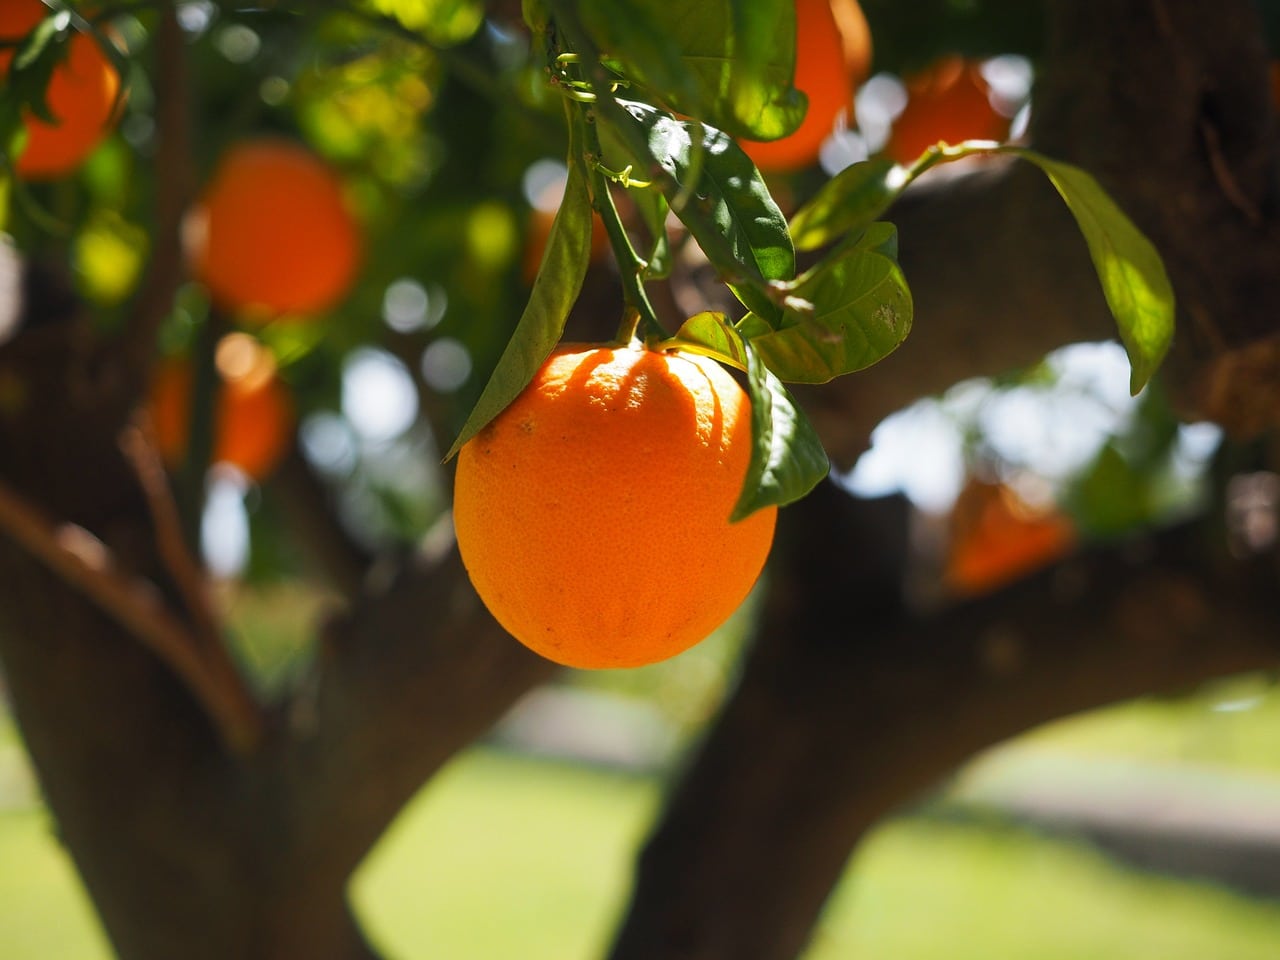 There are several pests that can affect the orange tree